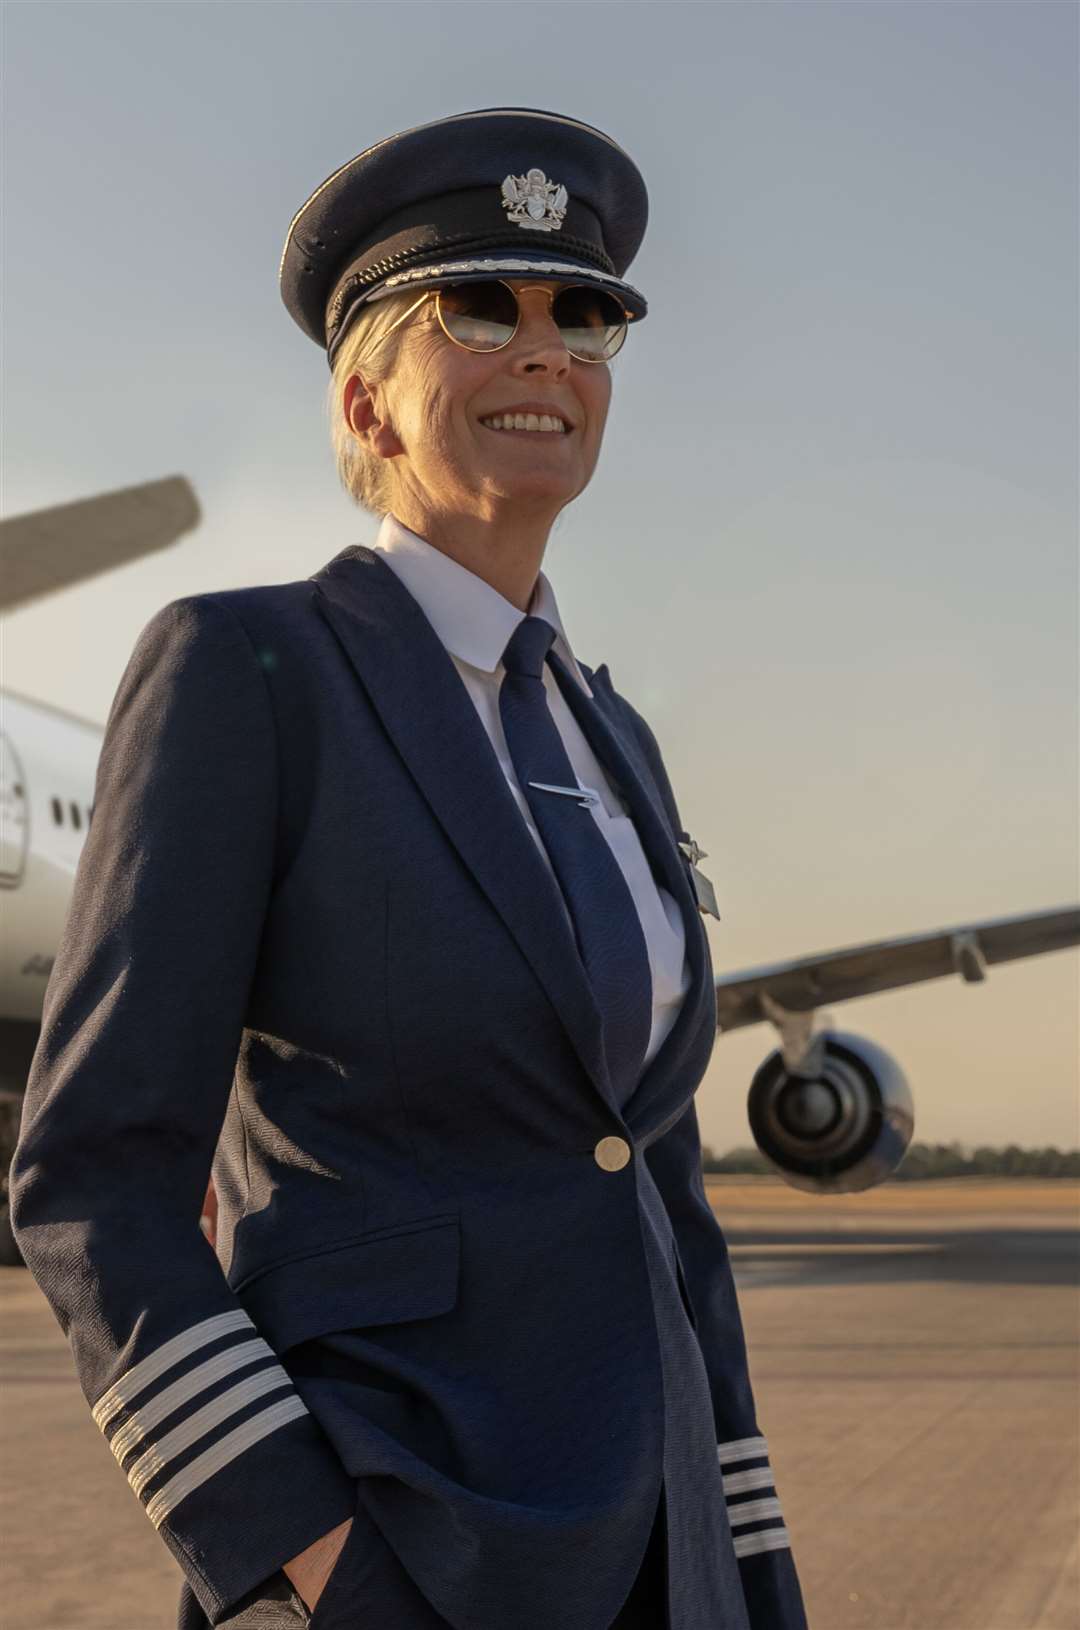 British Airways’ new uniform will be worn by more than 30,000 of its employees (British Airways/PA)